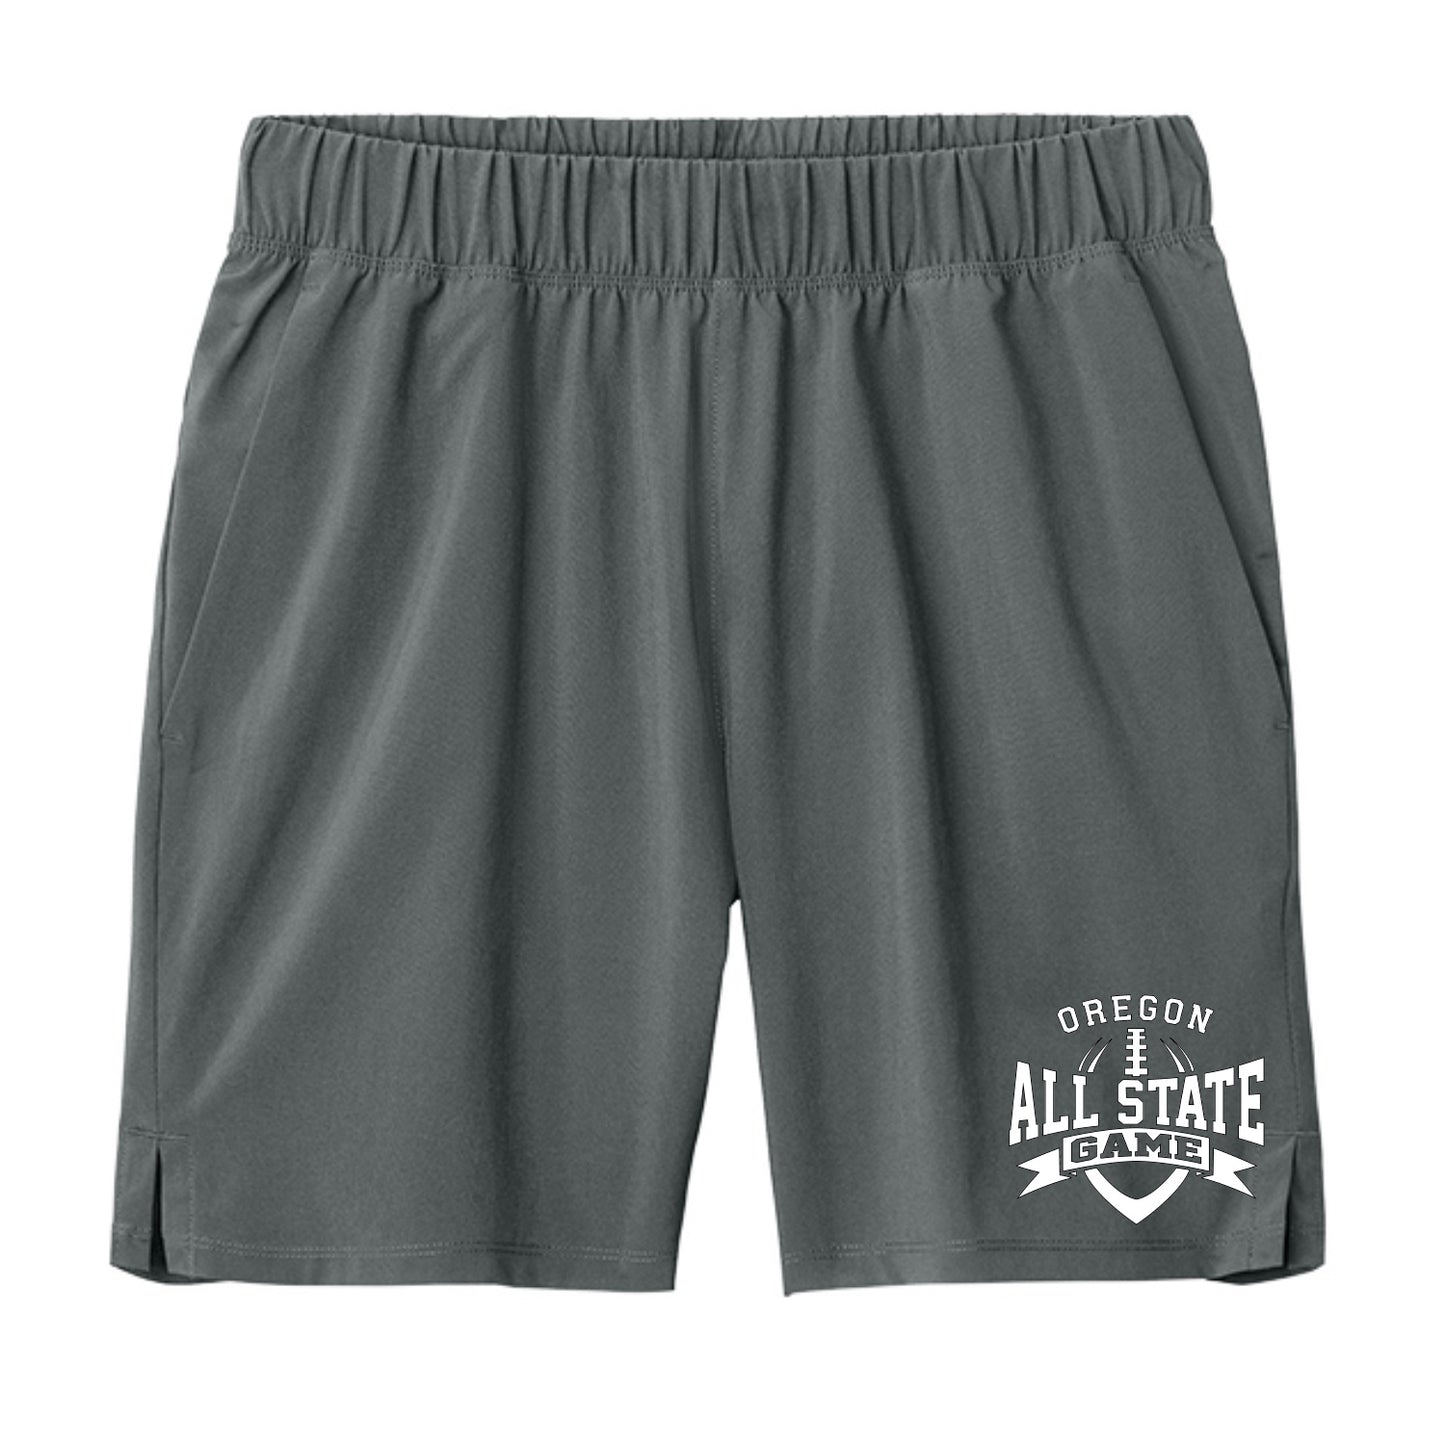 Oregon All State - YOUTH Polyester Short - 2 colors available